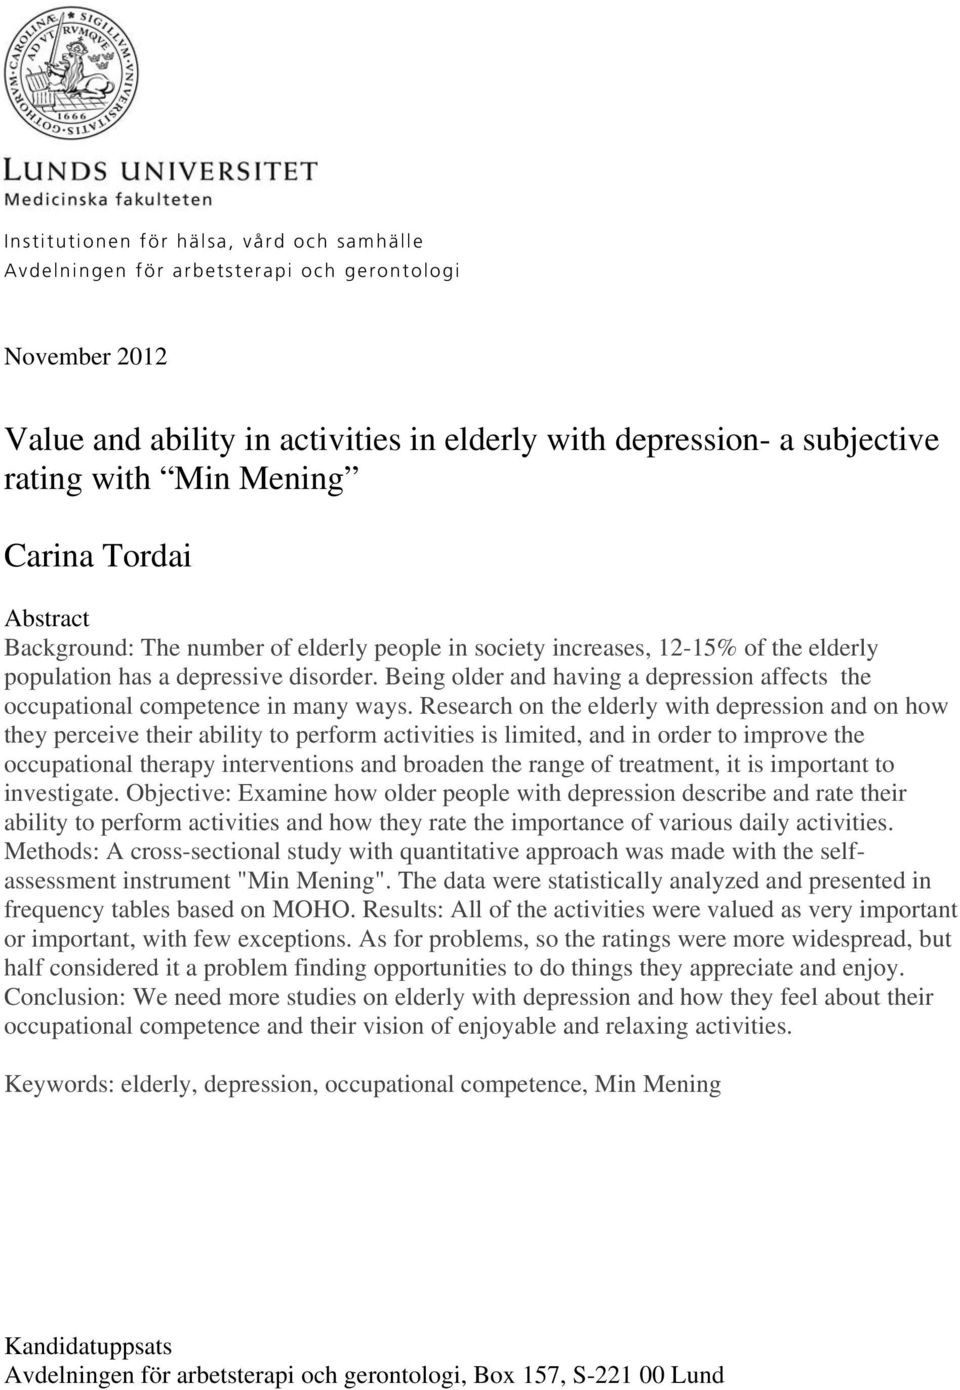 Being older and having a depression affects the occupational competence in many ways.